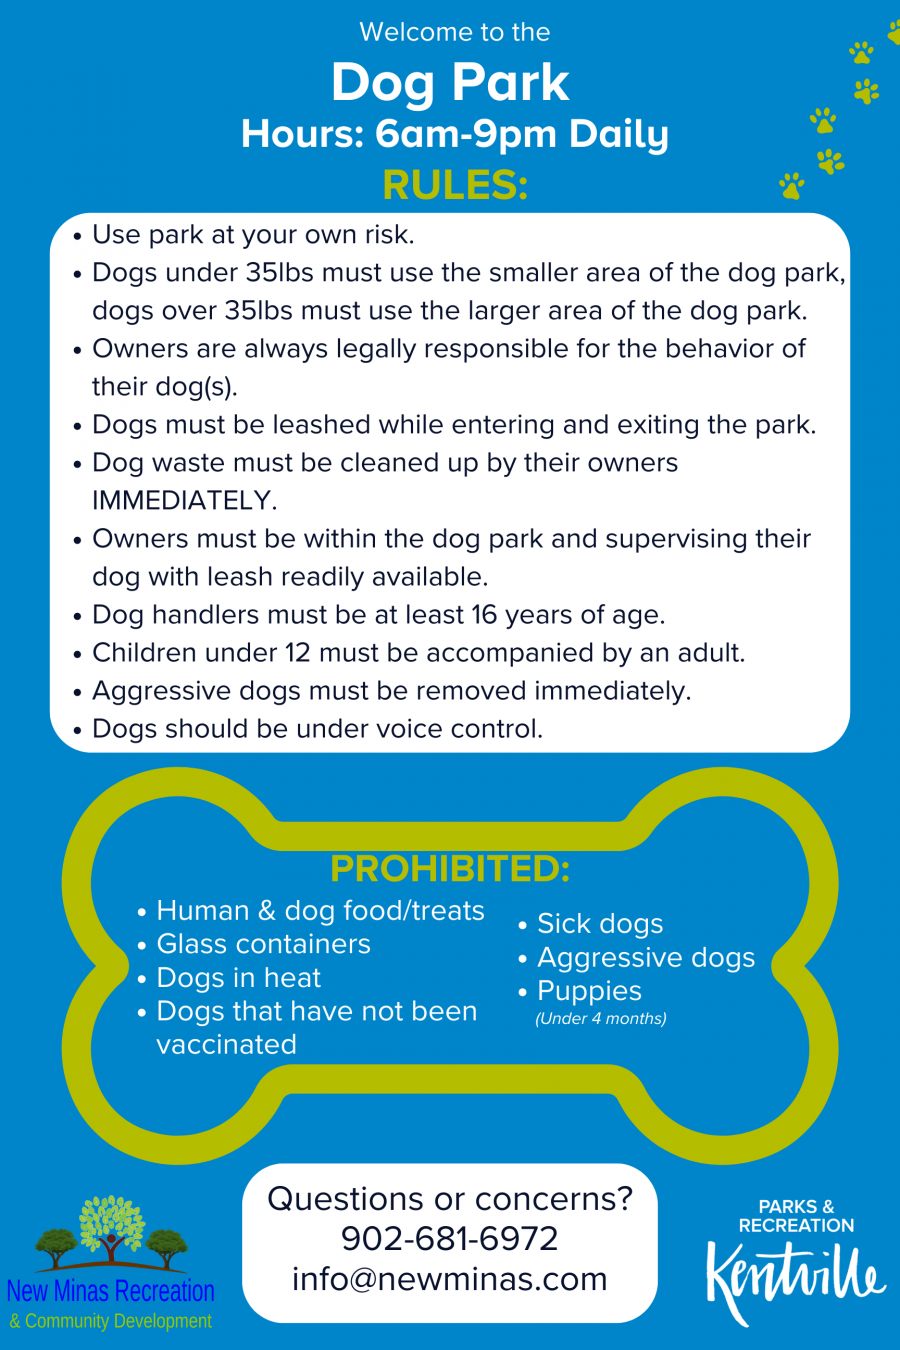 A list of rules for using the dog park